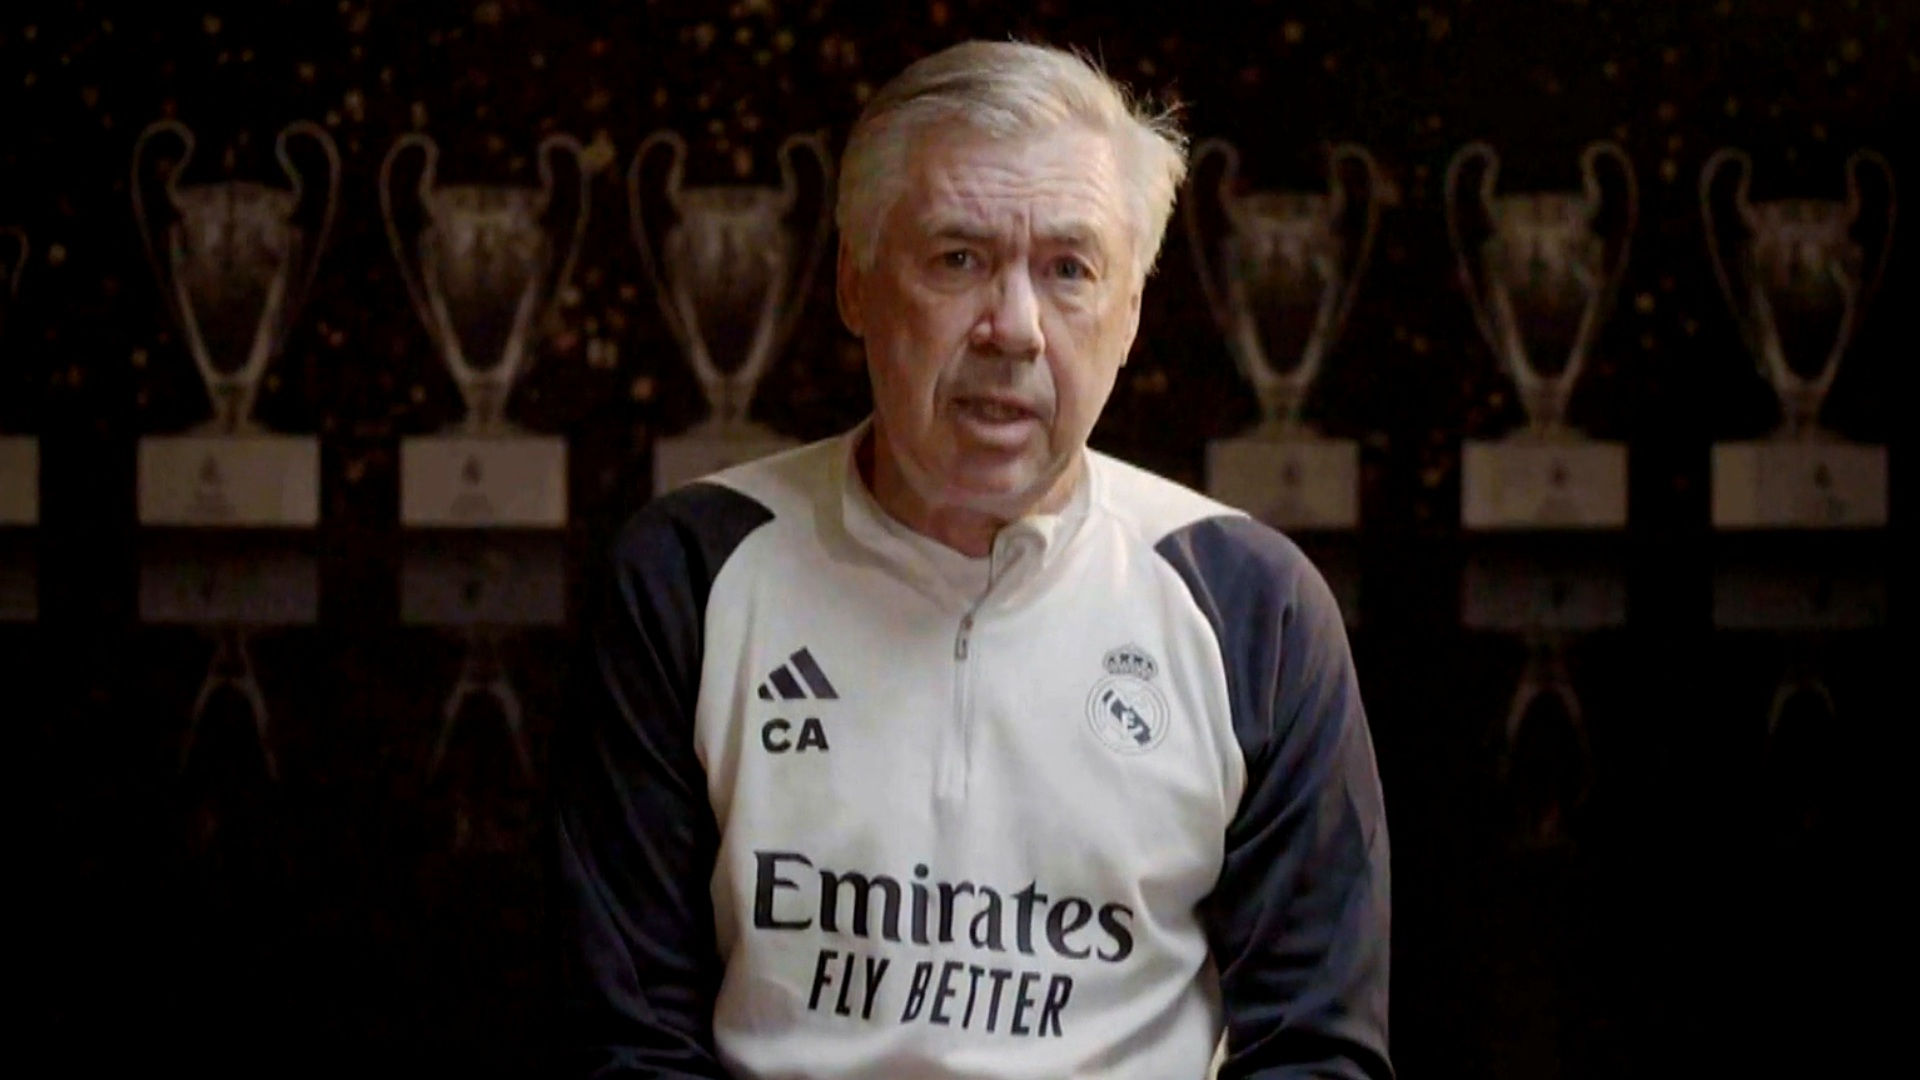 Ancelotti: "The Champions League final is the biggest game of the year and the most beautiful to be involved in"